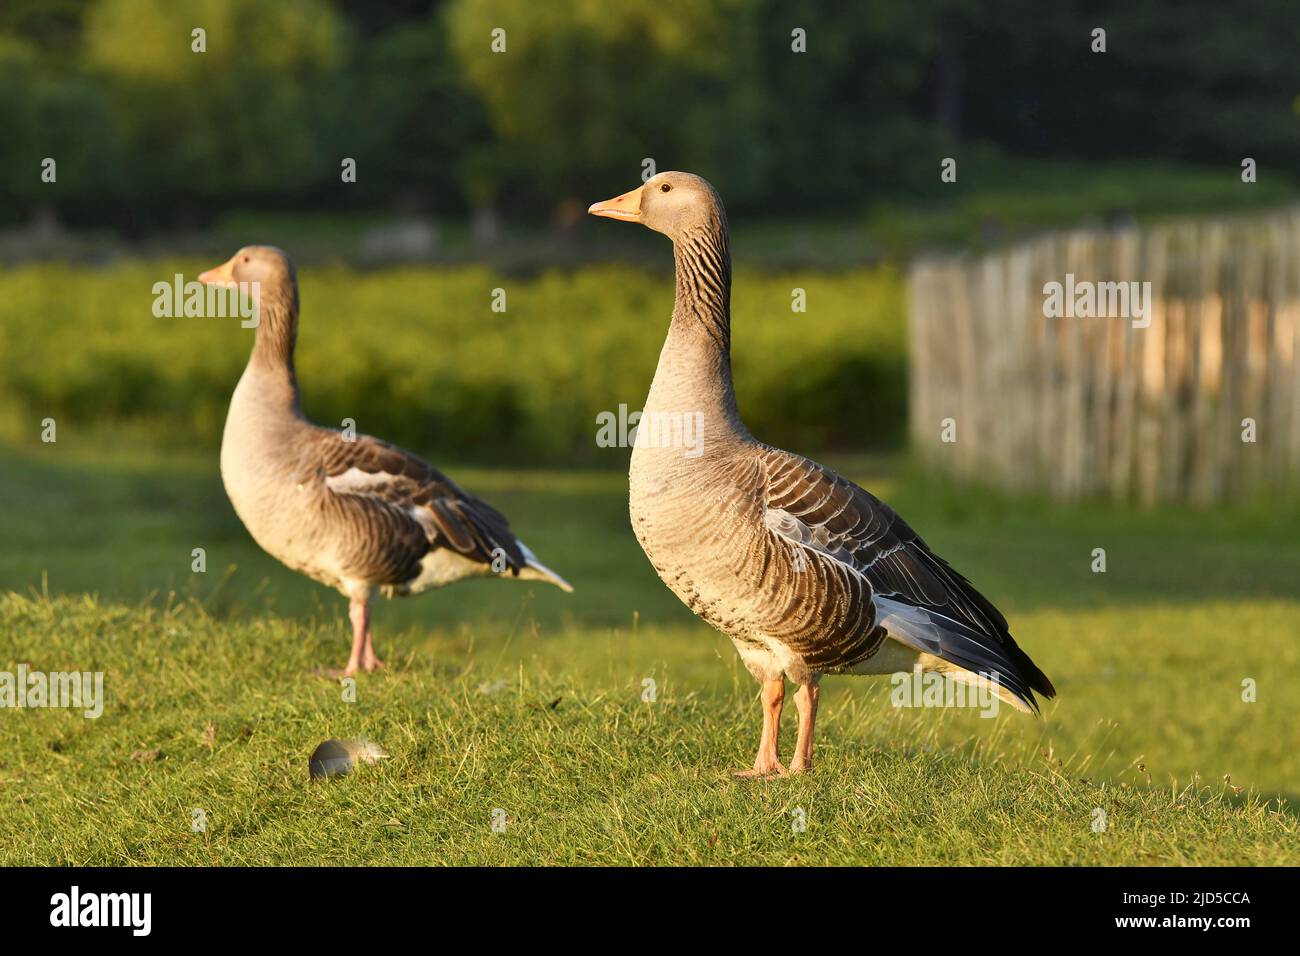 Graylag geese (Anser anser) on the grass in Richmond Park London UK. Stock Photo